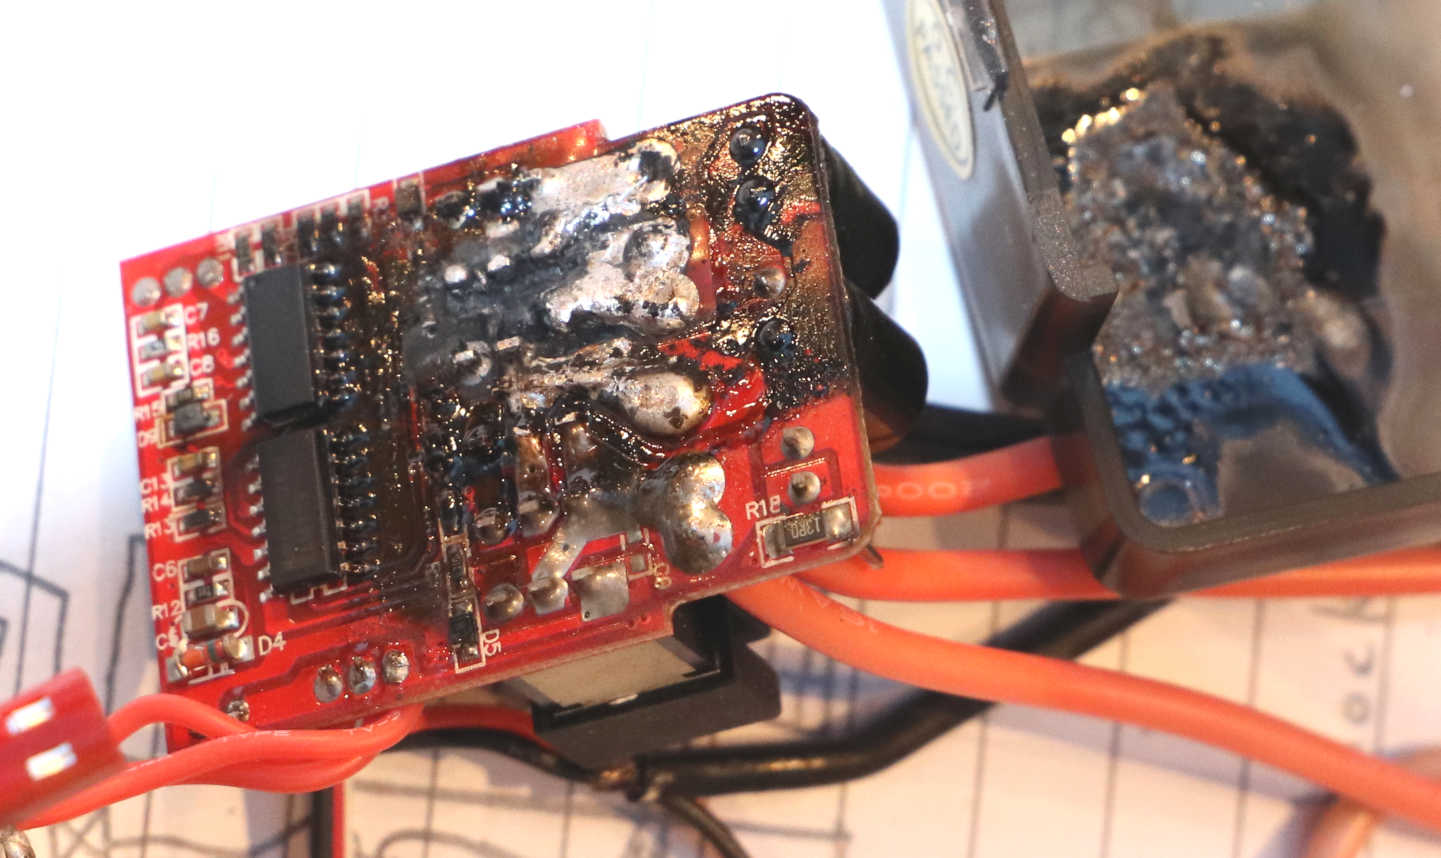 A Chinese speed controller that caught fire and blew up.